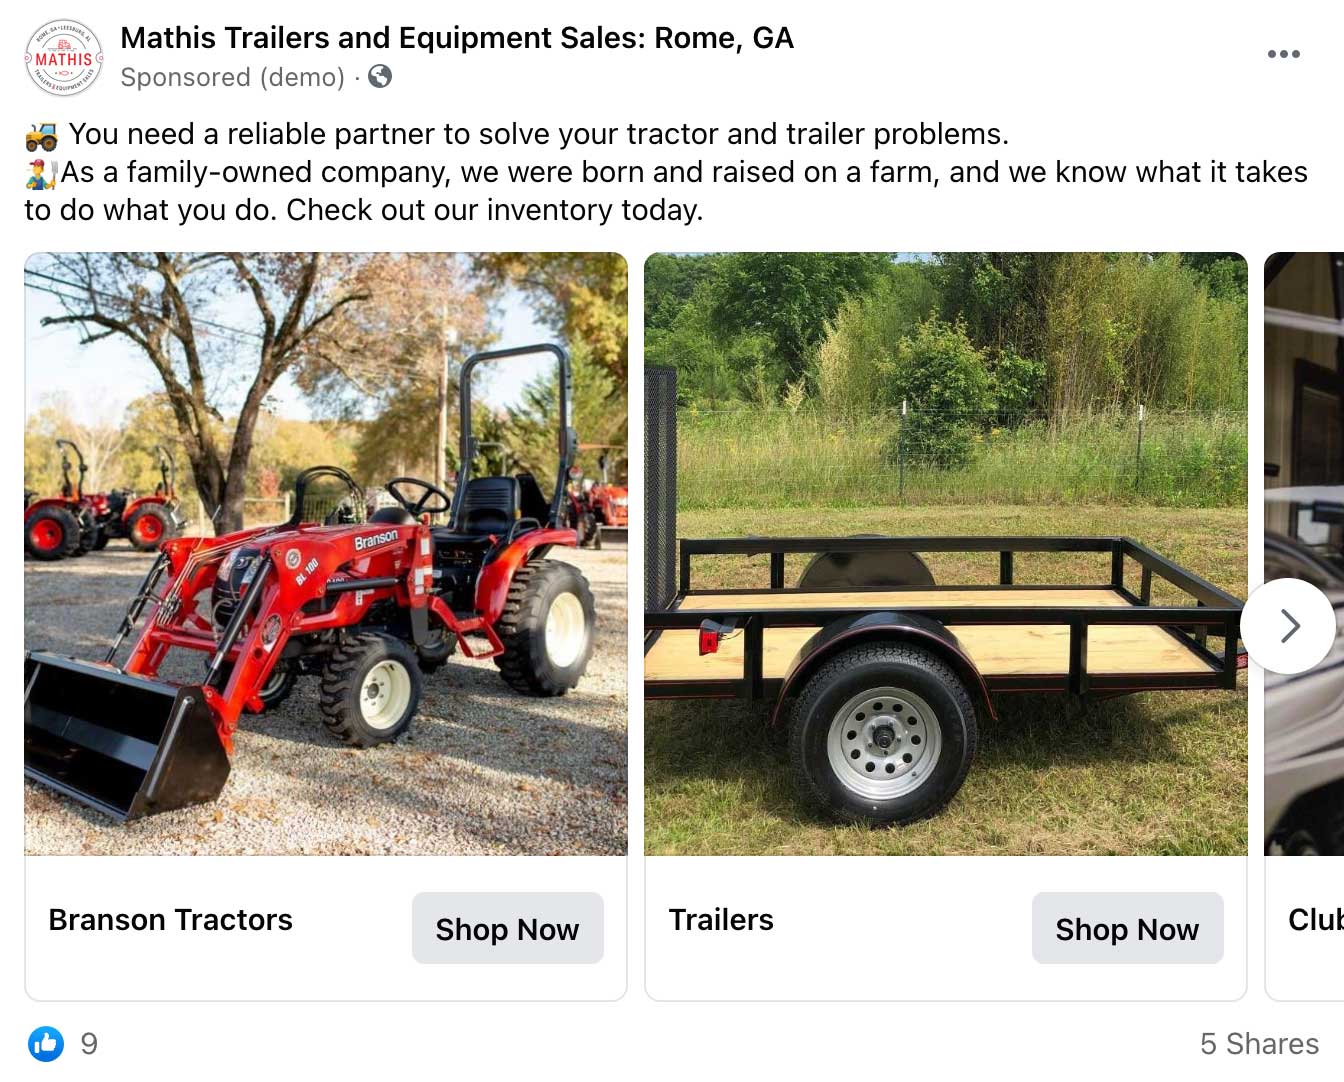 Screenshot of a Facebook ad for Mathis Trailers